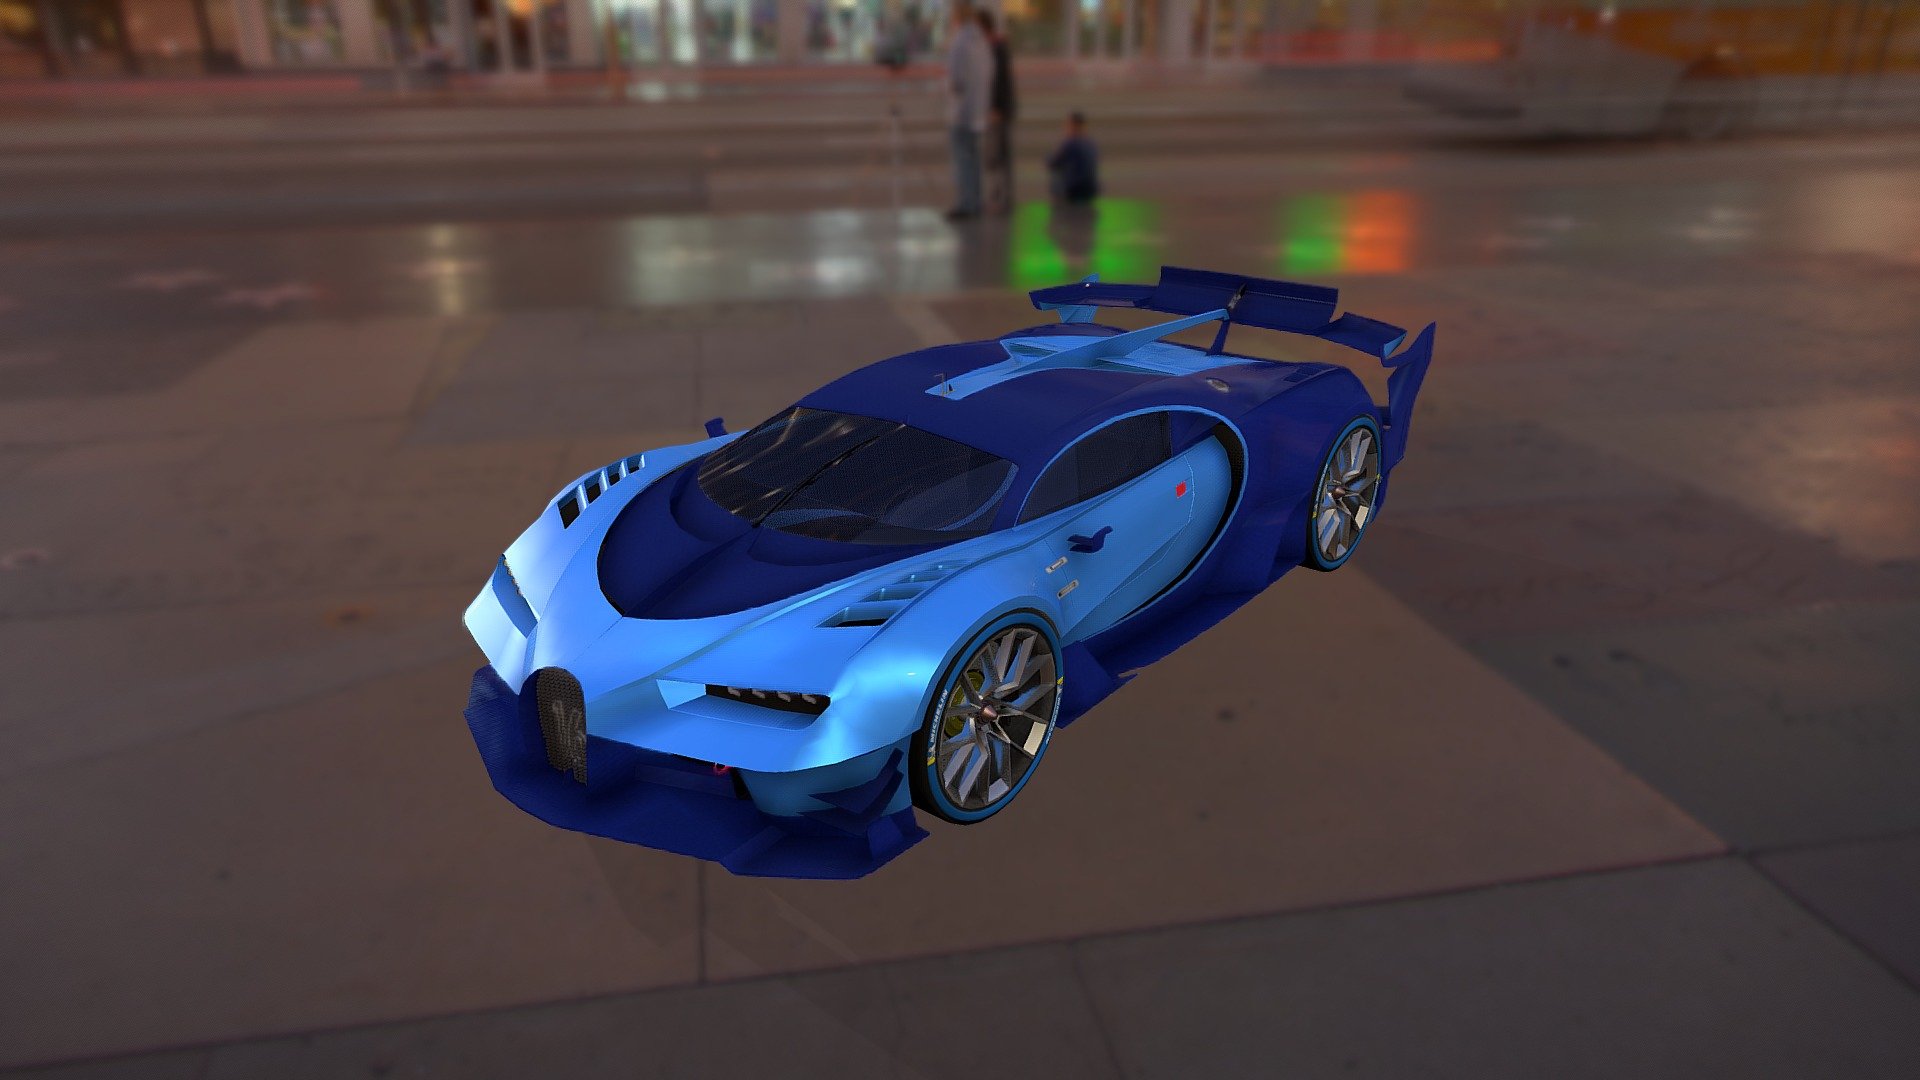 Unfortunately(
My models are not allowed to be sold on this site(
because I'm from Russia&hellip;
This model can be purchased on the asset store for $7.99.
 The Bugatti Vision Gran Turismo is a single-seater concept car developed by Bugatti and was manufactured in Molsheim, Alsace, France. The car was unveiled at the 2015 Frankfurt Motor Show, a month after its teaser trailer was released, which was titled #imaginEBugatti.[1] It was built under the Vision Gran Turismo project, and with its looks, influenced the Bugatti Chiron’s design language. The color scheme of the car is based on the 1937 Le Mans-winning Bugatti Type 57G Tank racer 3d model